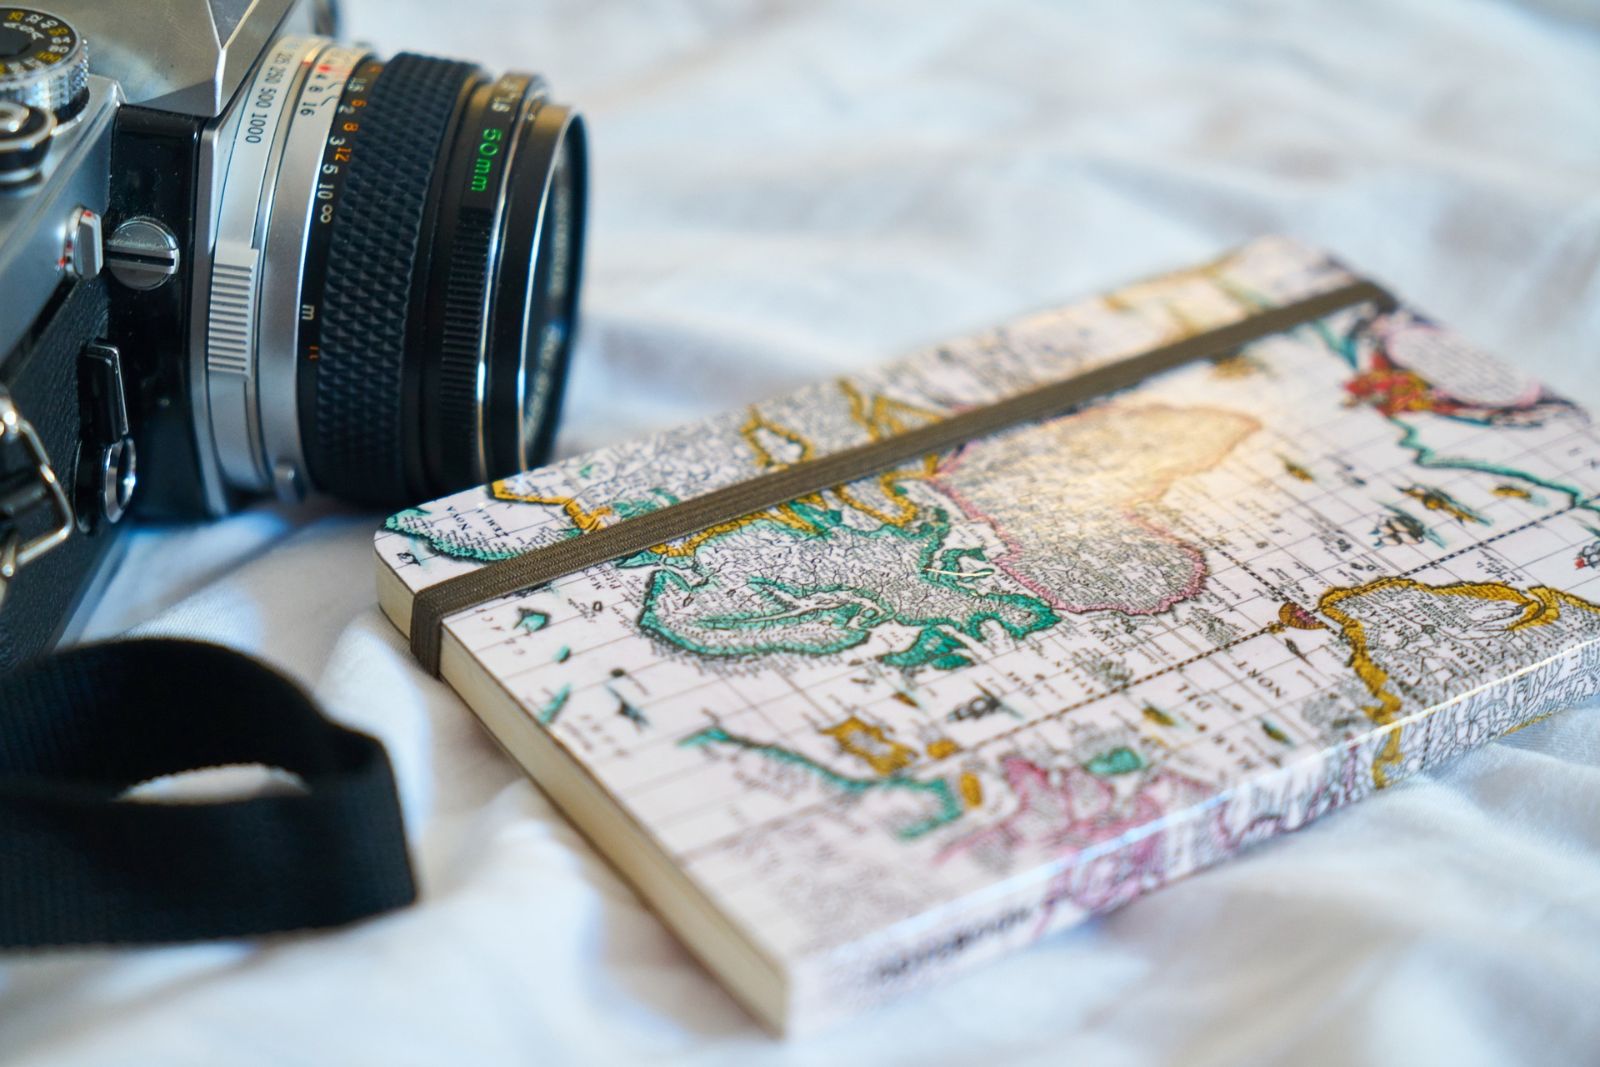 A camera and journal for documenting a sabbatical